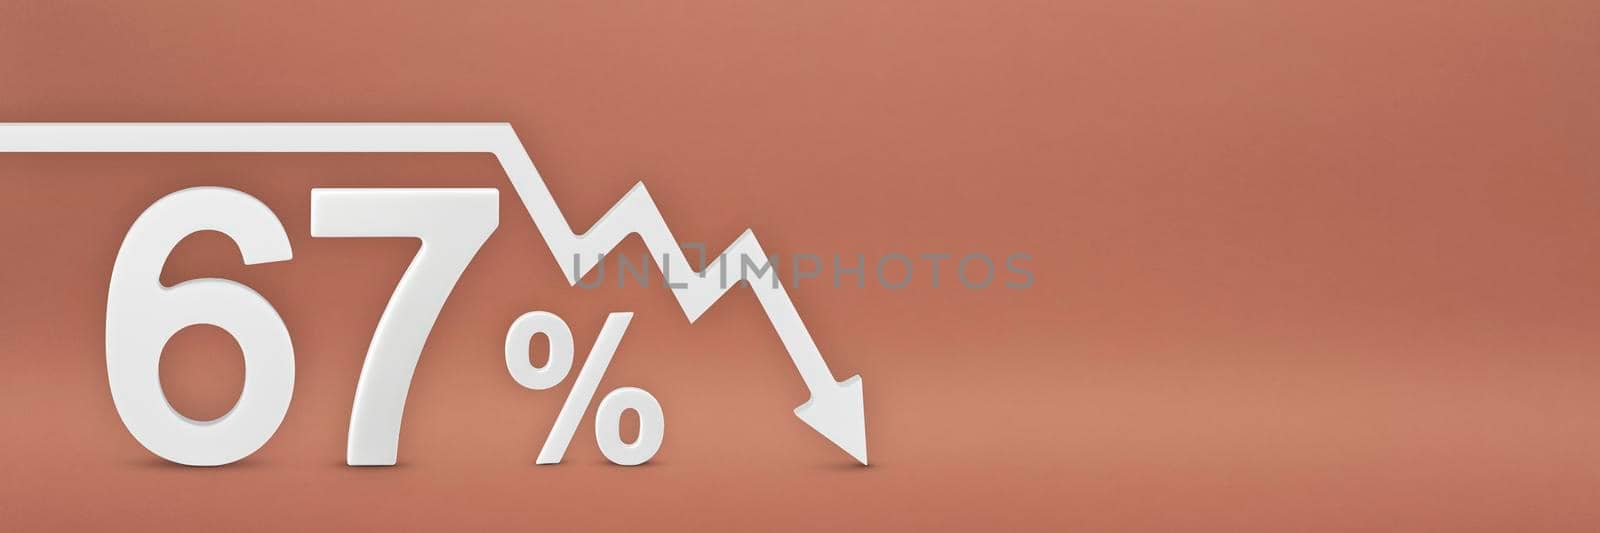 sixty-seven percent, the arrow on the graph is pointing down. Stock market crash, bear market, inflation.Economic collapse, collapse of stocks.3d banner,67 percent discount sign on a red background. by SERSOL